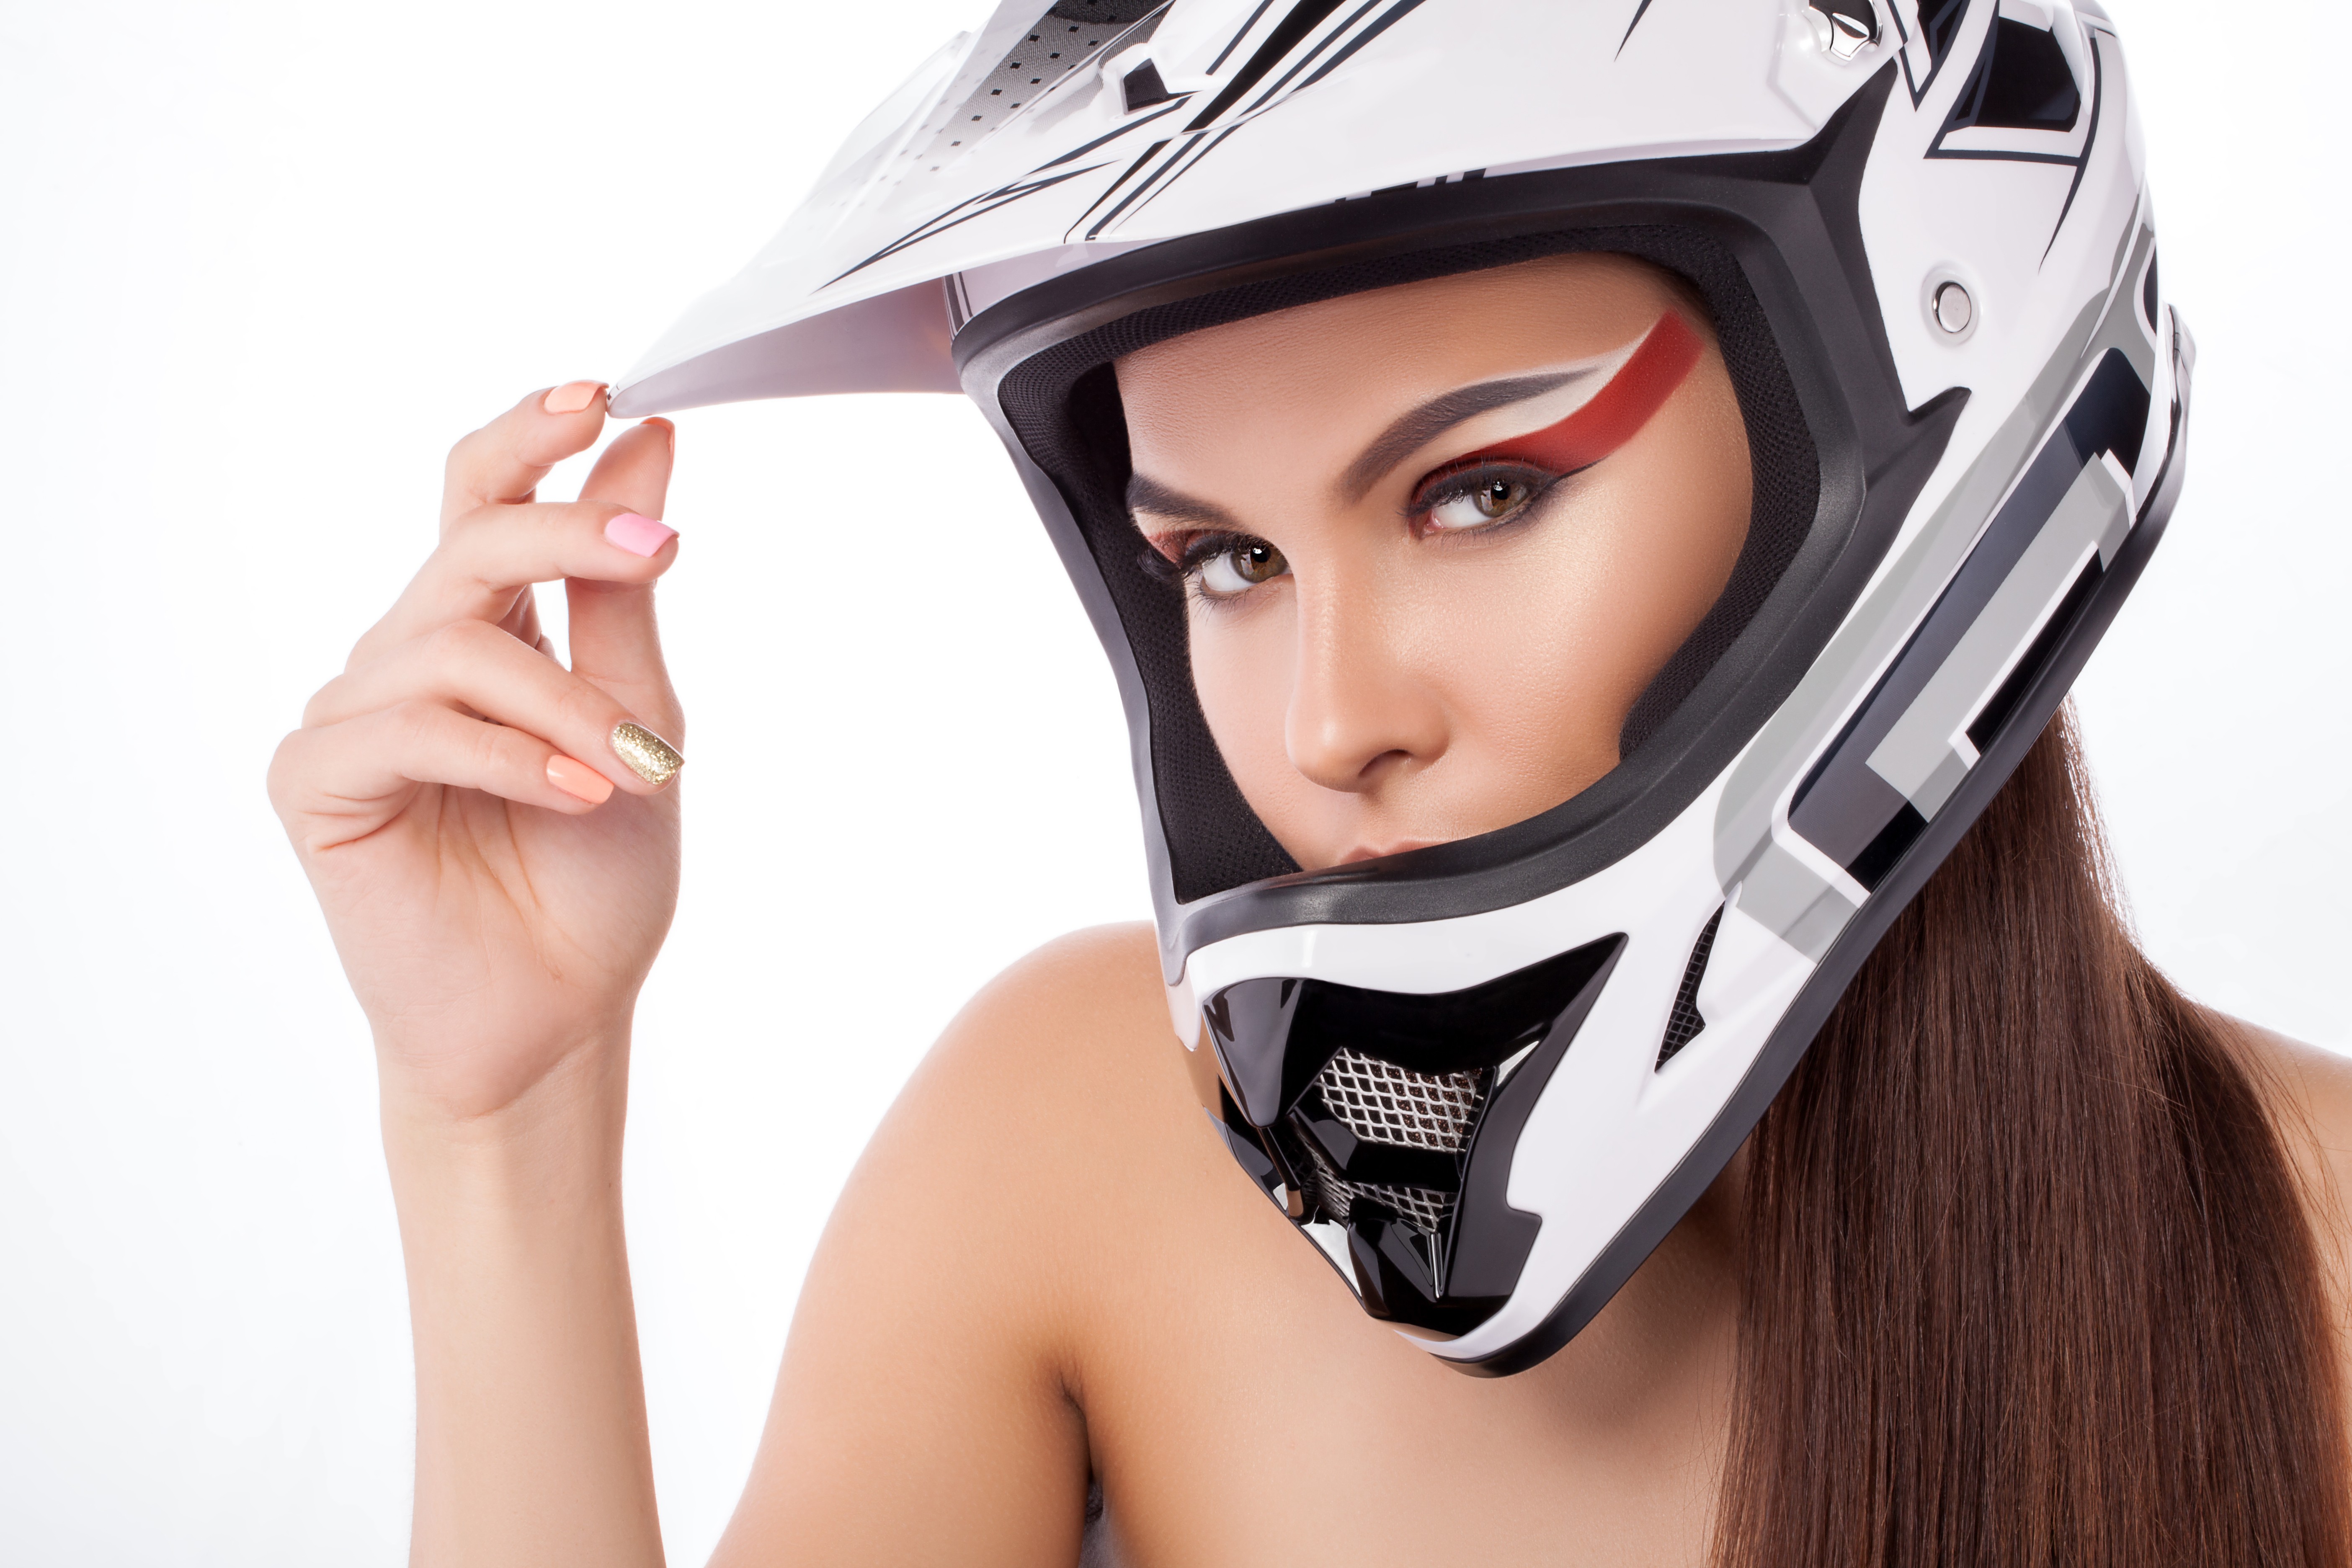 Helmet People Face Eyeshadow Brunette Covered Face Painted Nails Looking At Viewer Makeup 5616x3744